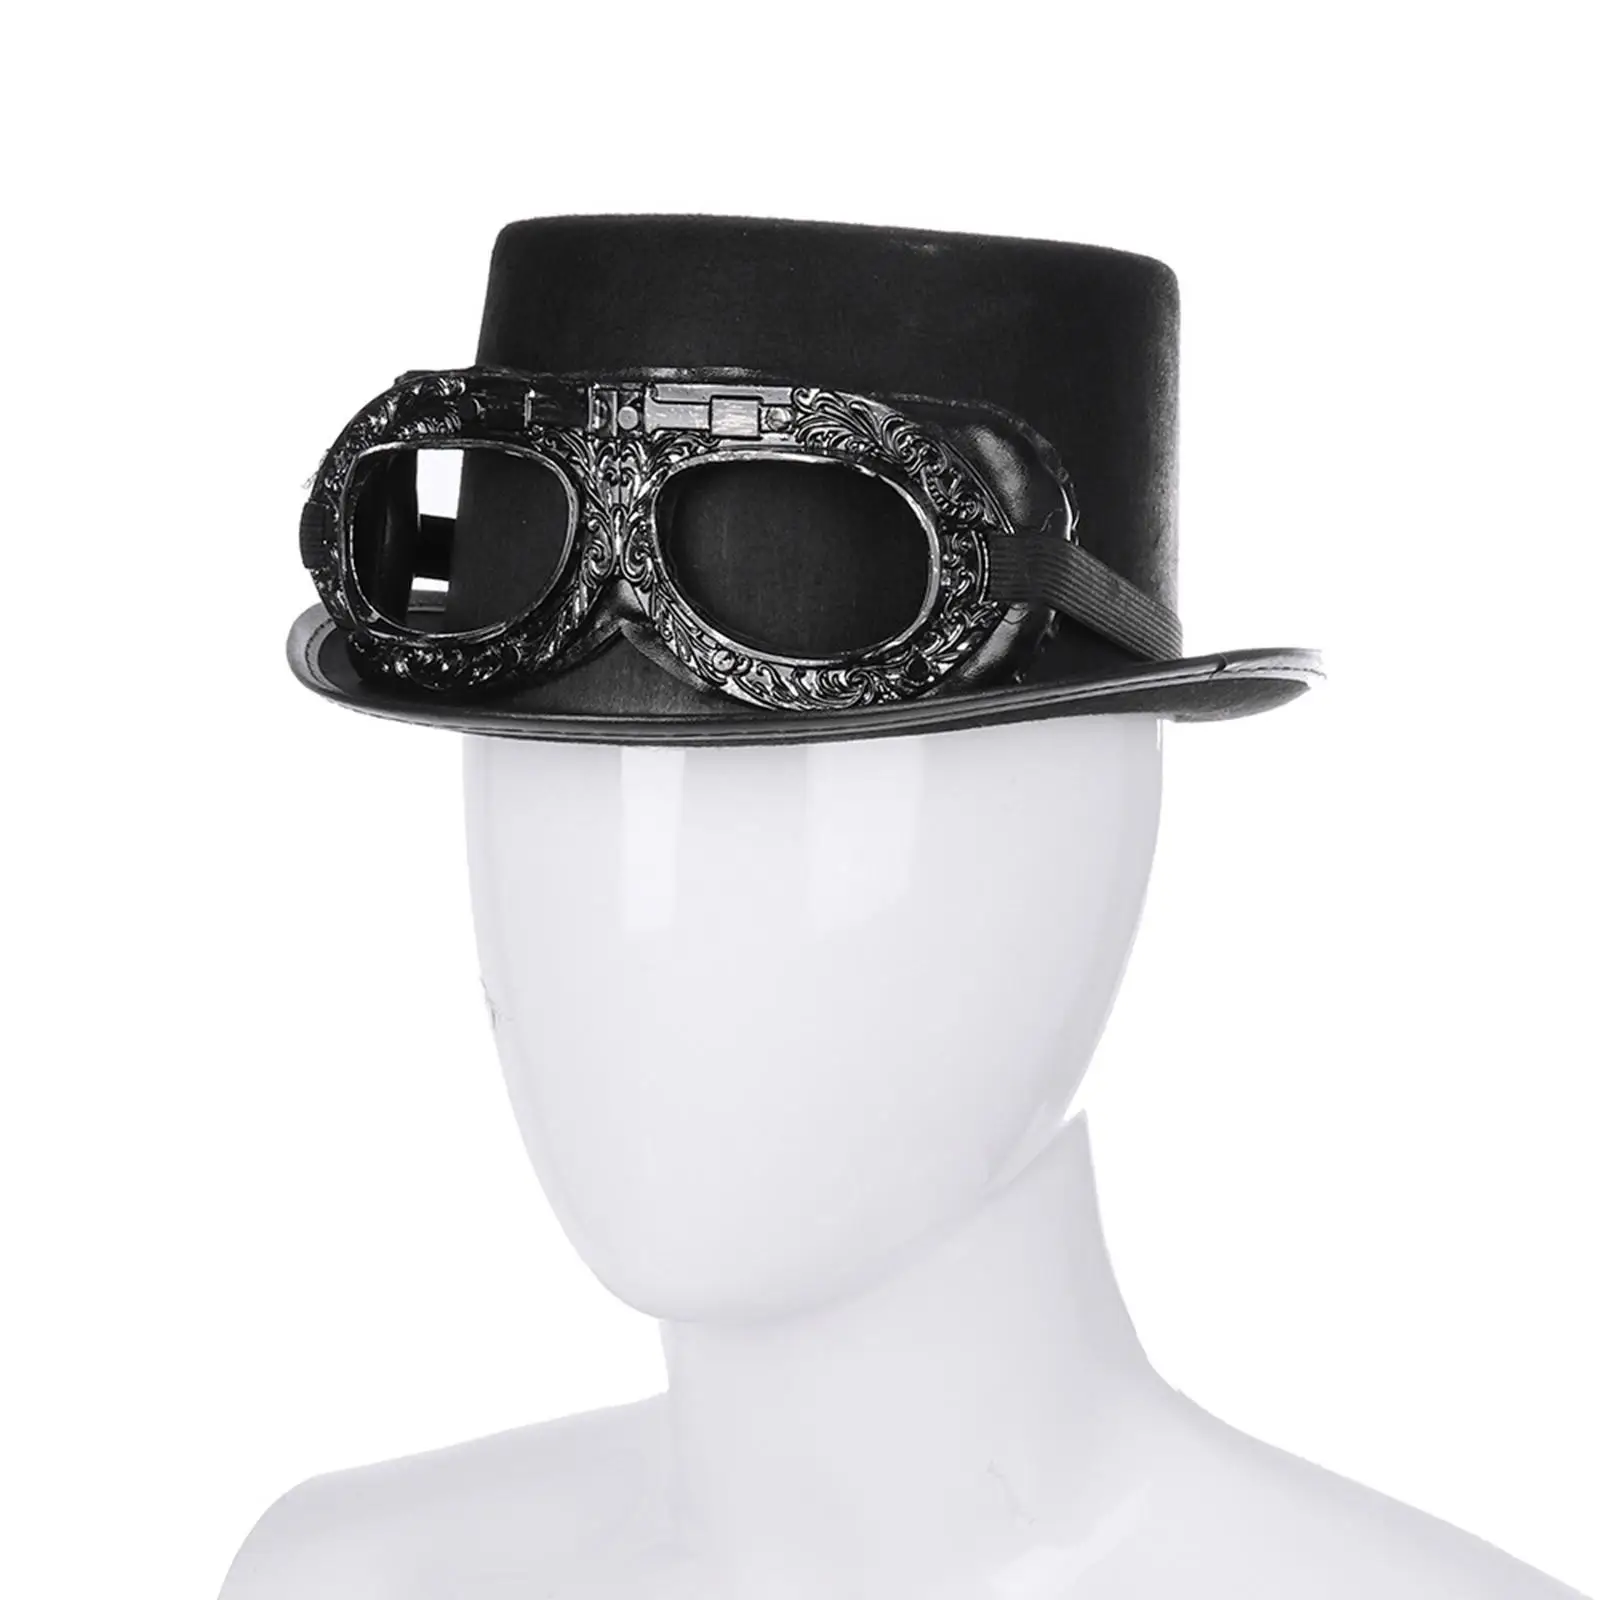 Deluxe Black Steampunk Top Hat with Goggles Punk Costume Hat Gear for Unisex Halloween Party Fancy Dress Costume Accessory